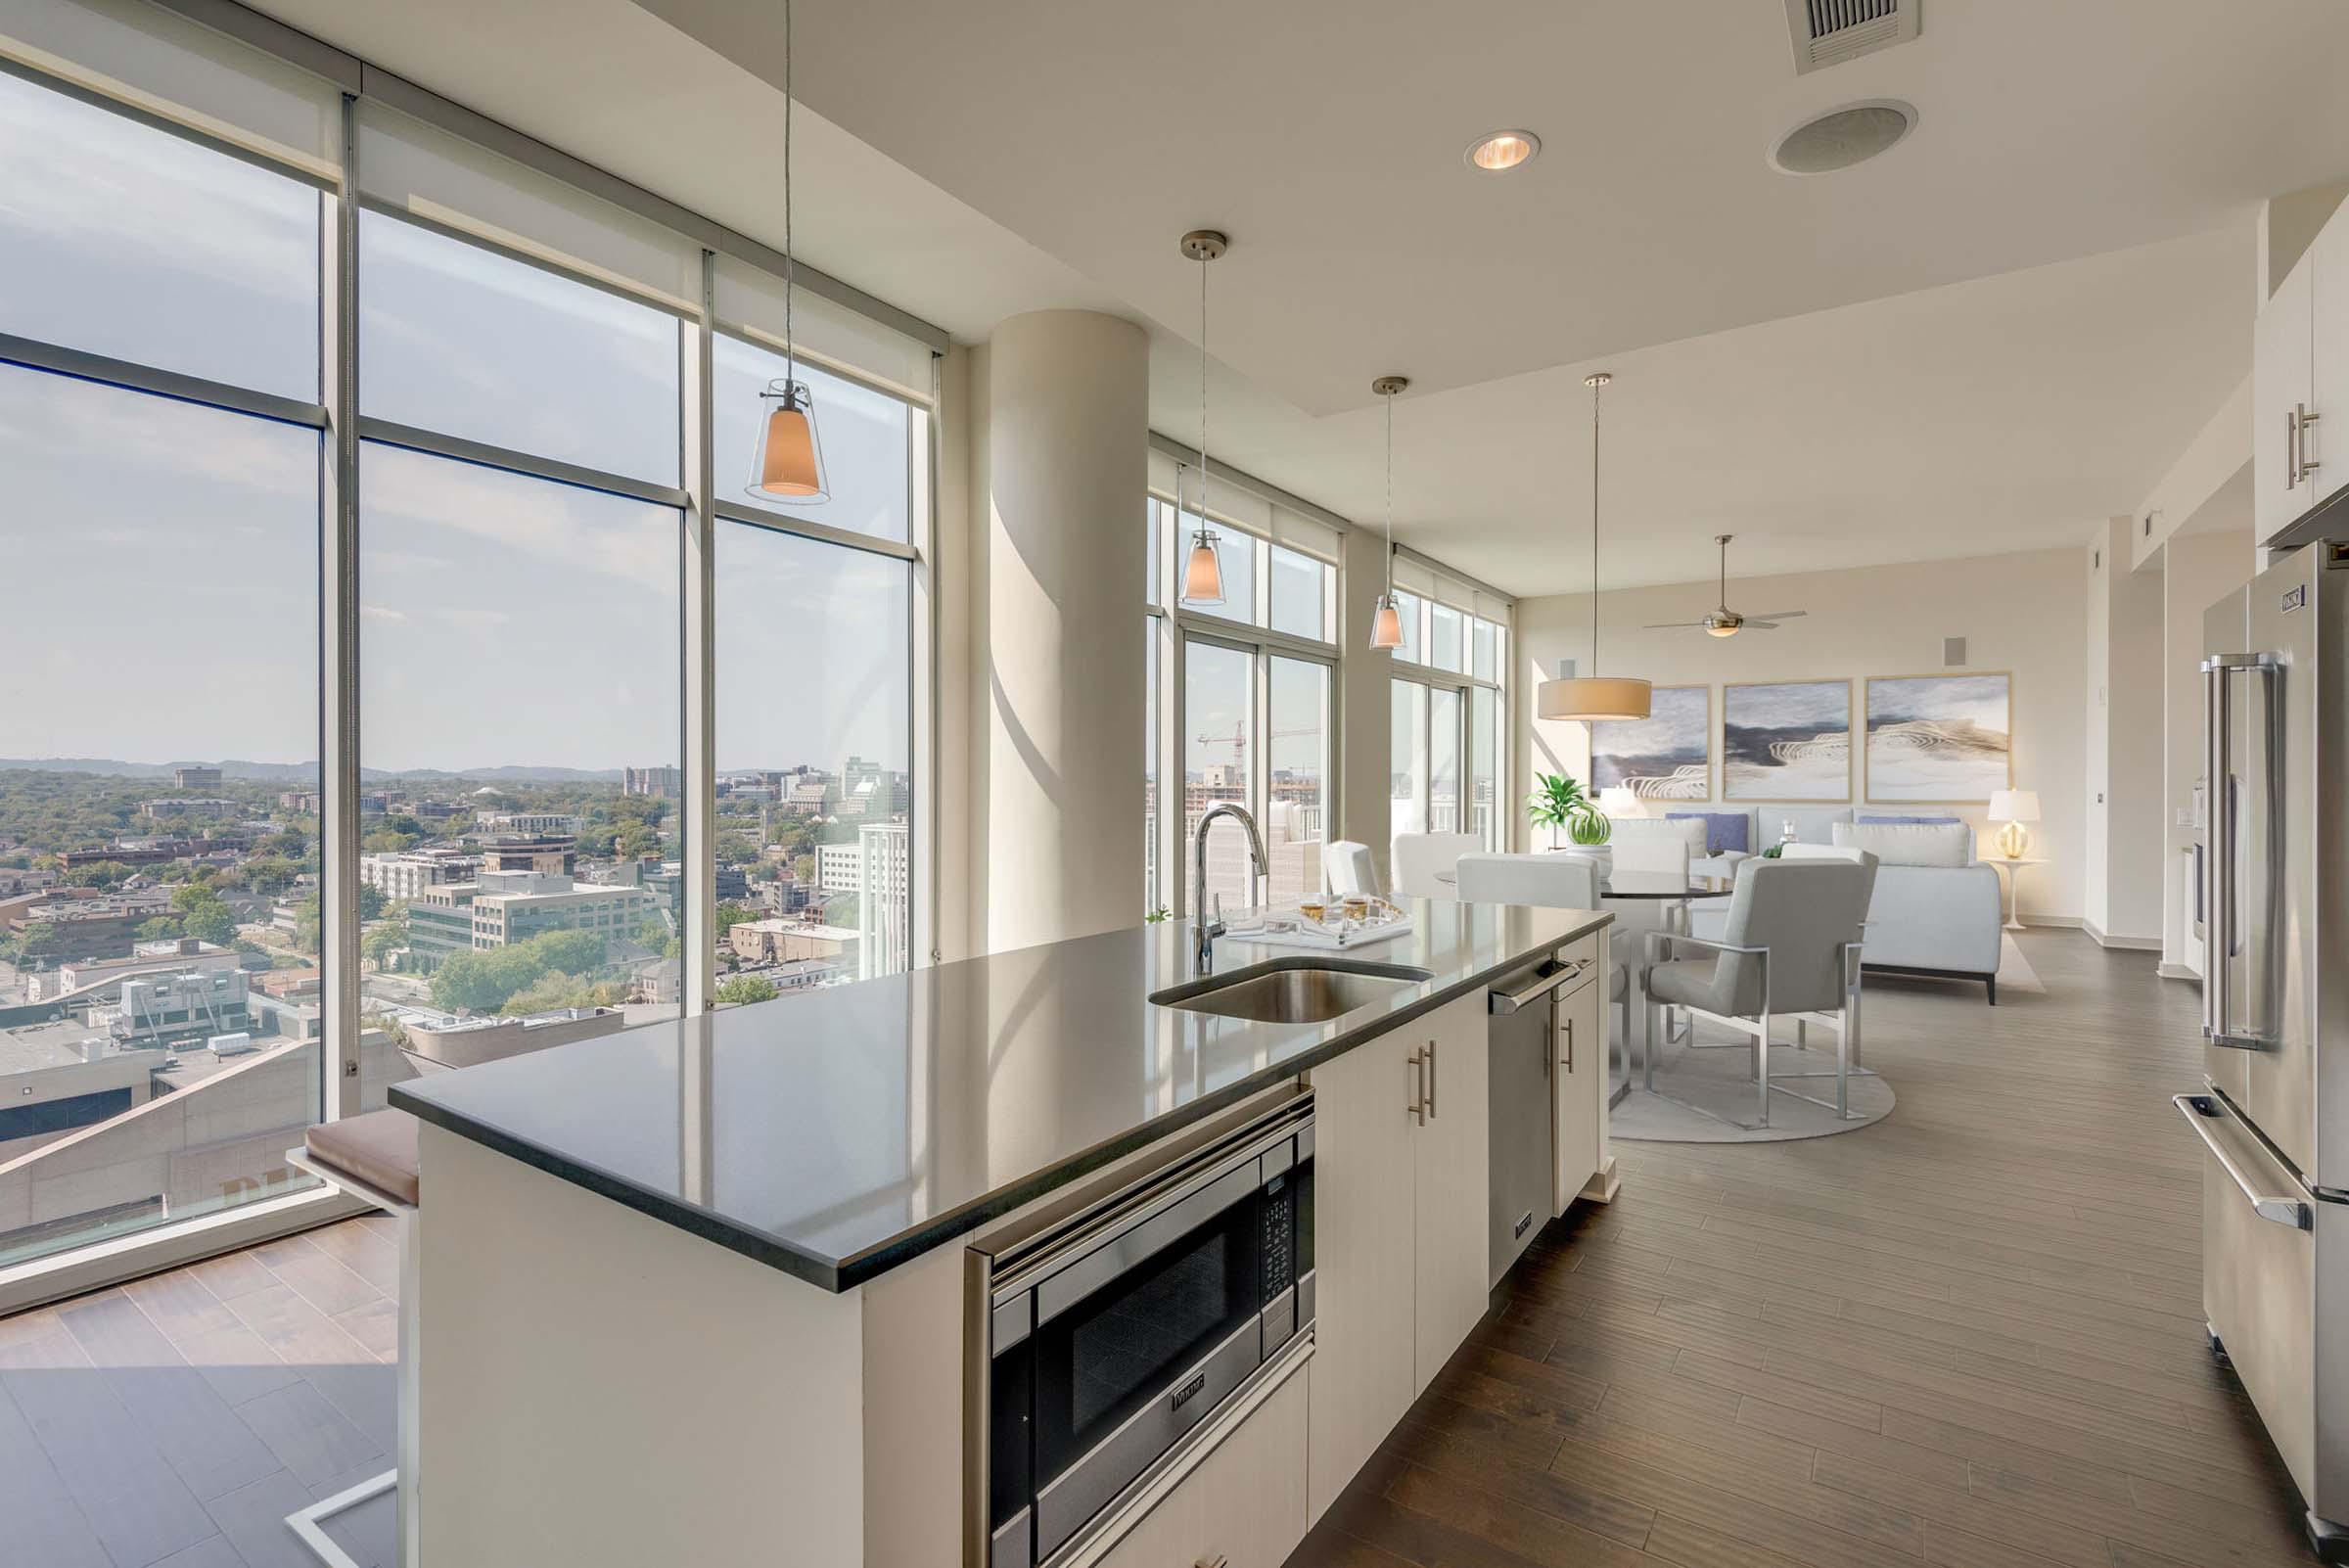 Camden Music Row Apartments Penthouse kitchen with island, floor to ceiling windows, room for dining, built-in appliances